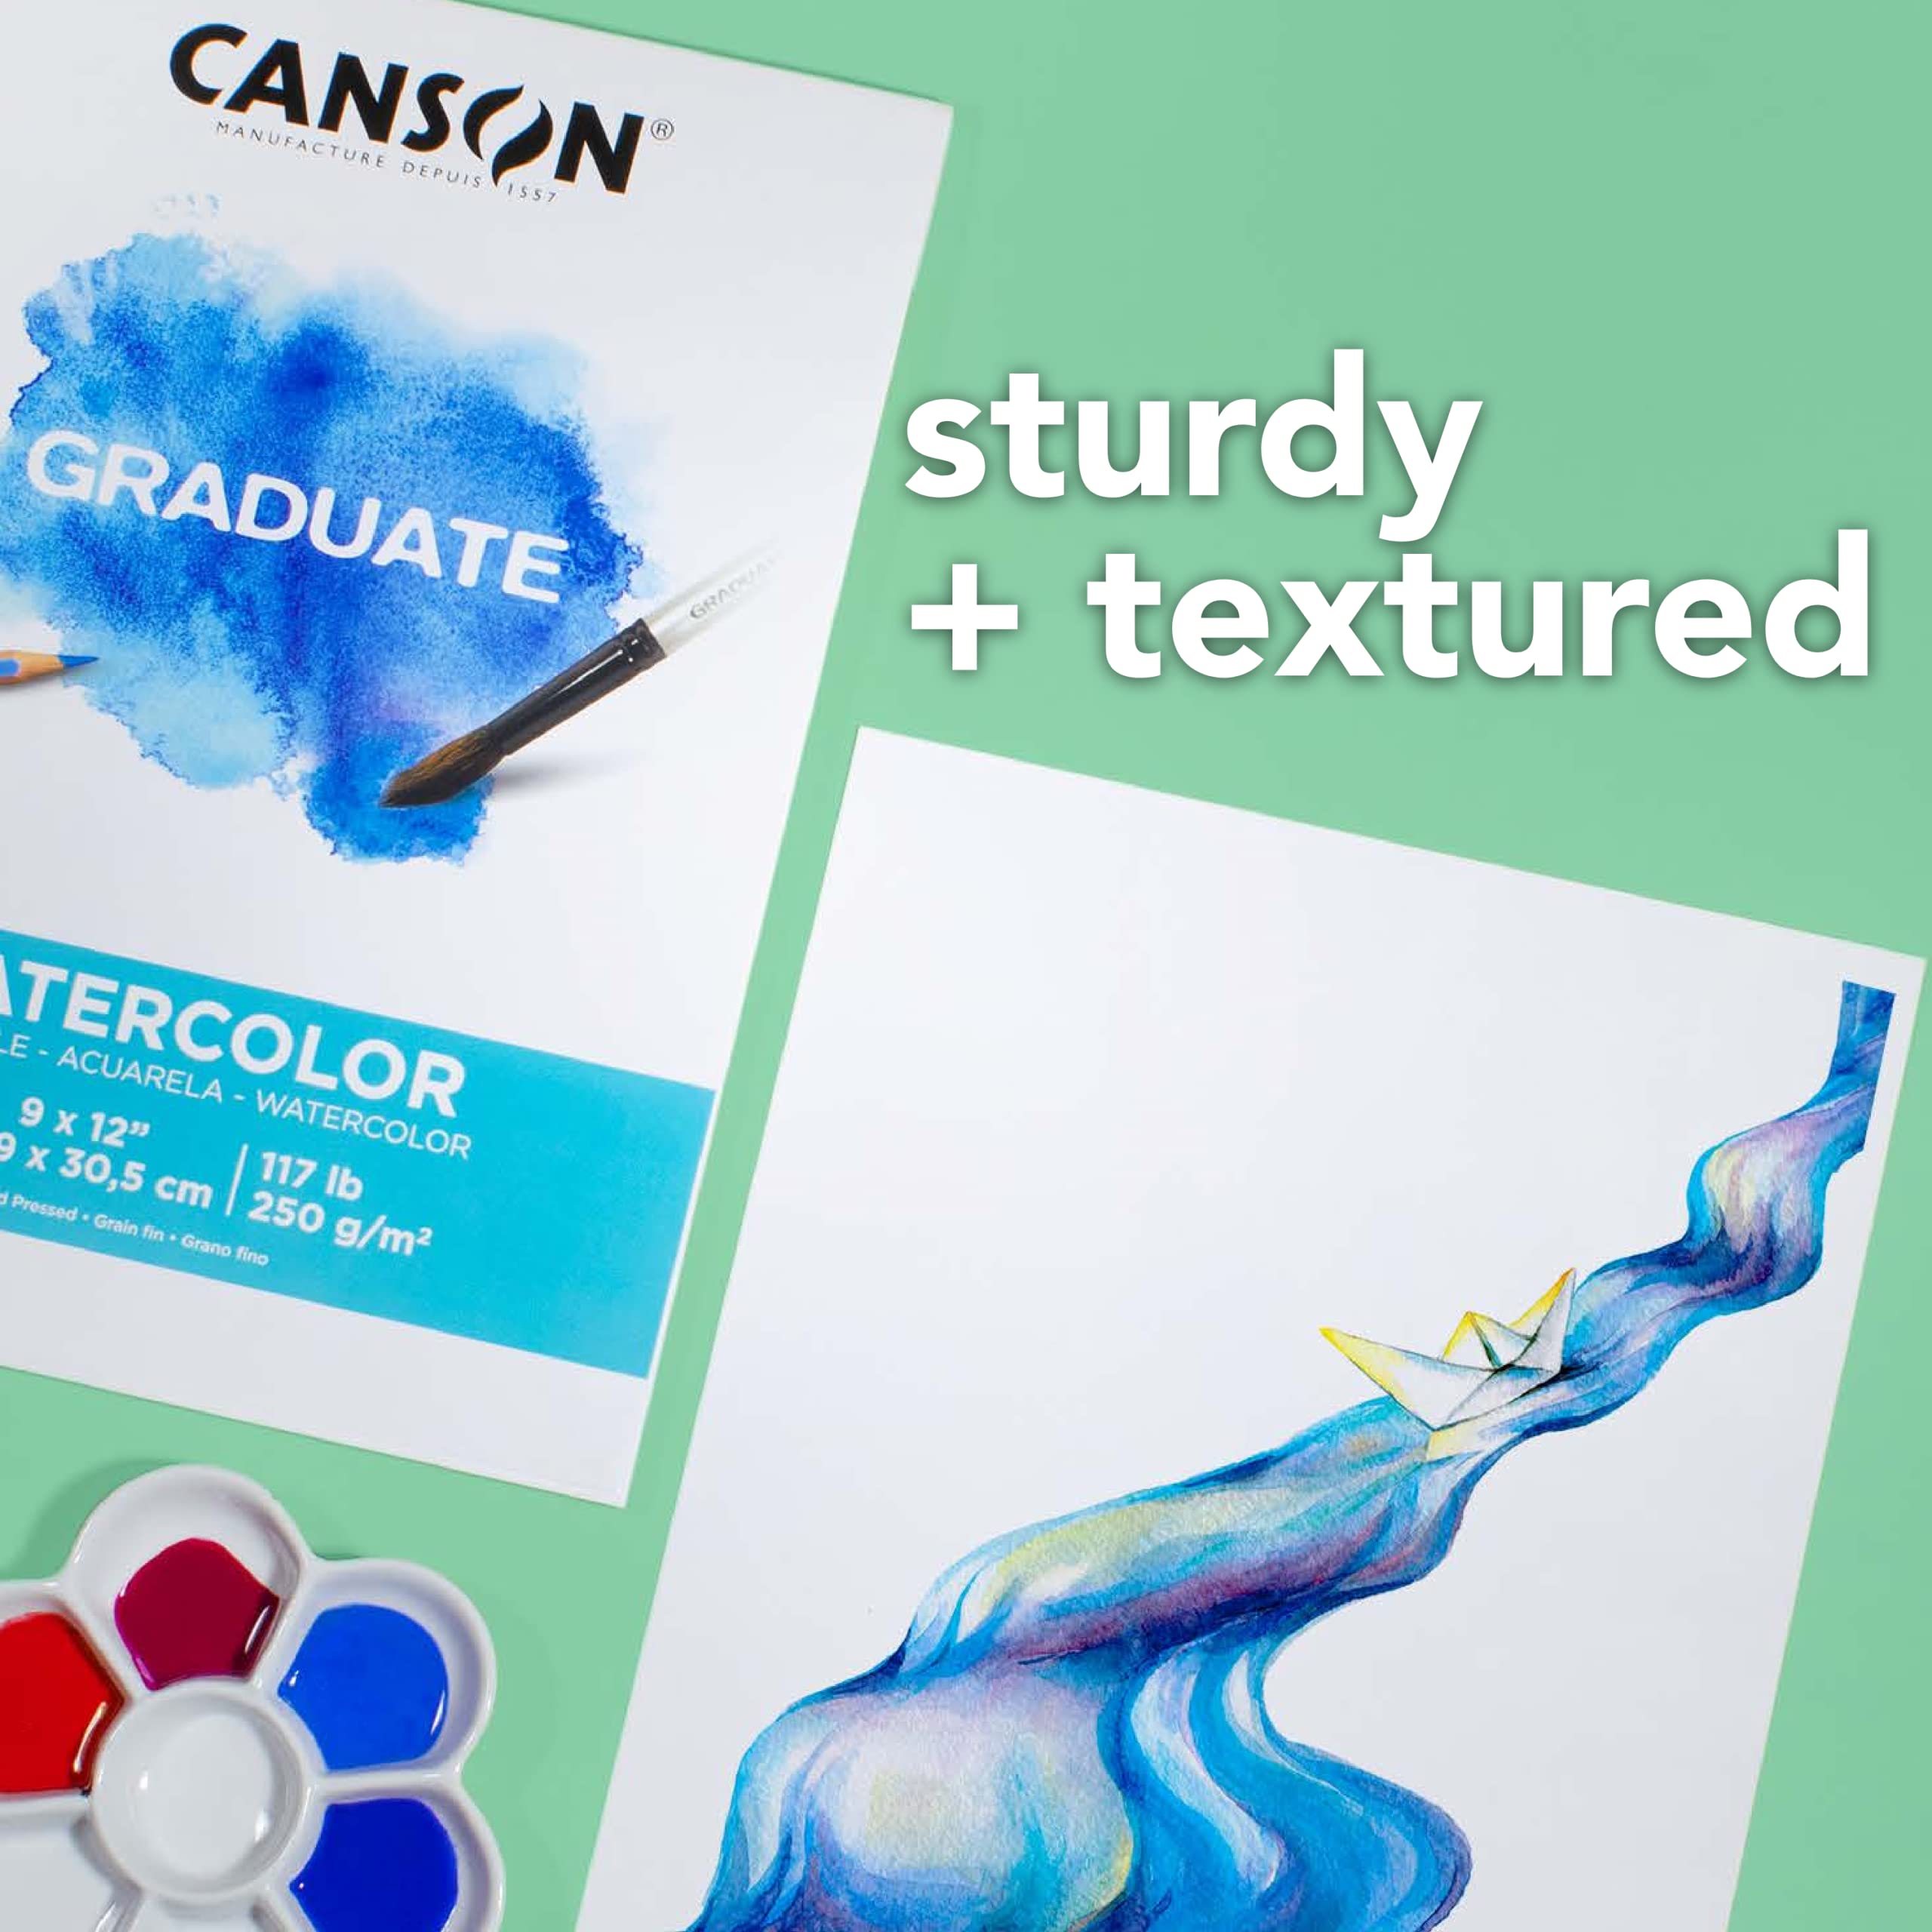 Canson Graduate Watercolor Pad, Foldover, 9x12 inch, 20 Sheets | Artist Paper for Adults and Students - Painting, Gouache, Mixed Media and Ink